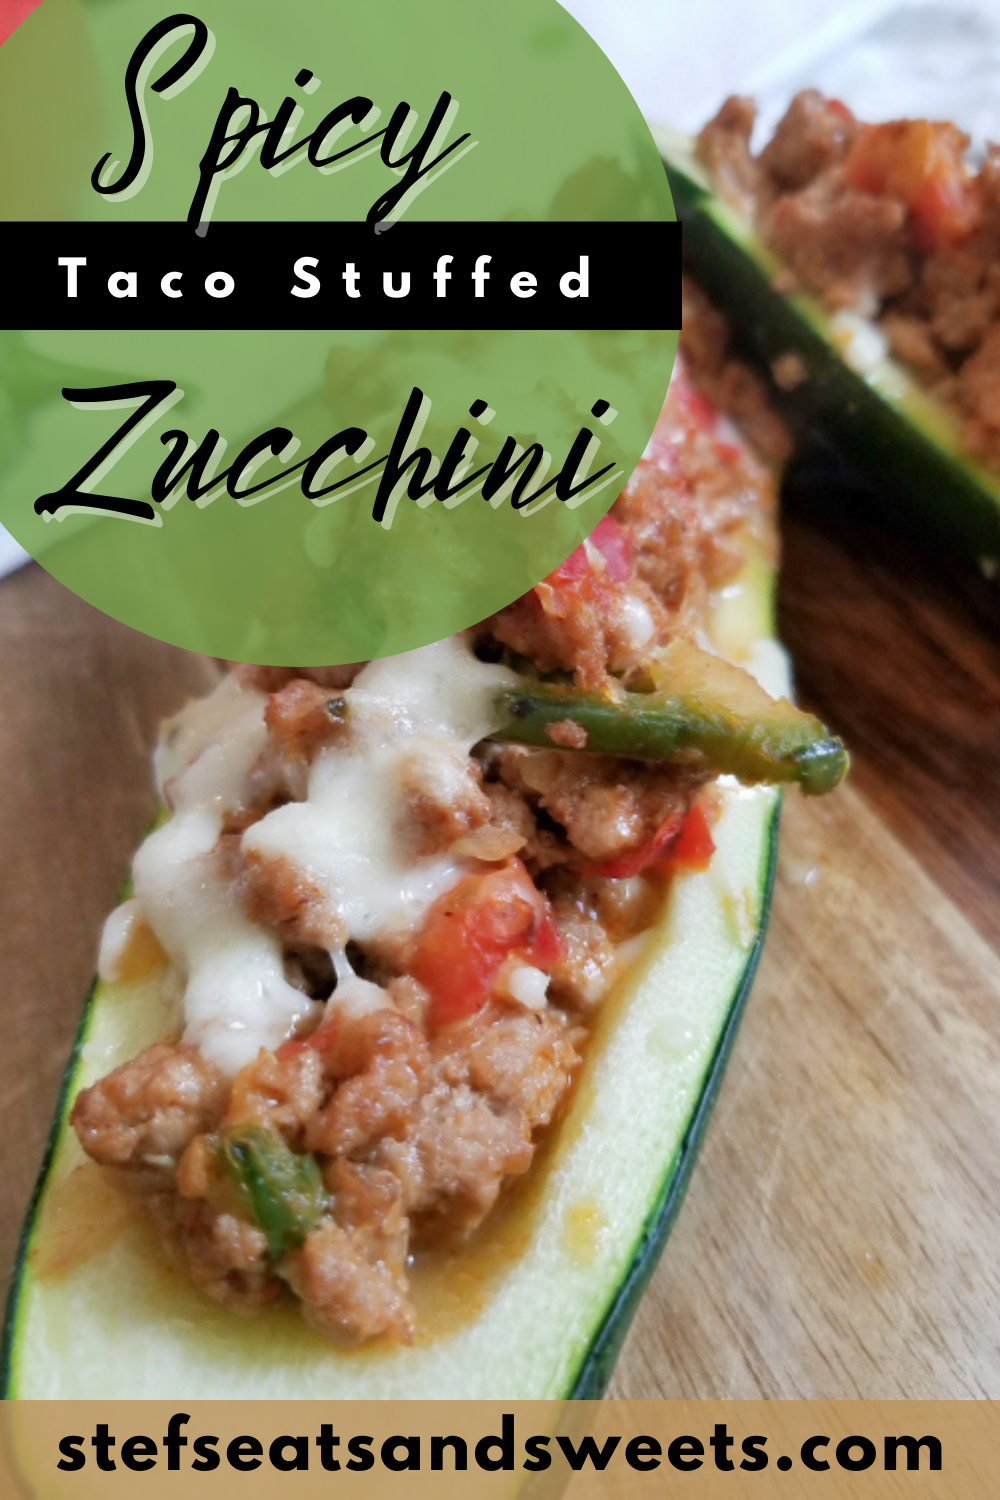 Spicy Taco Stuffed Zucchini - Stef's Eats and Sweets